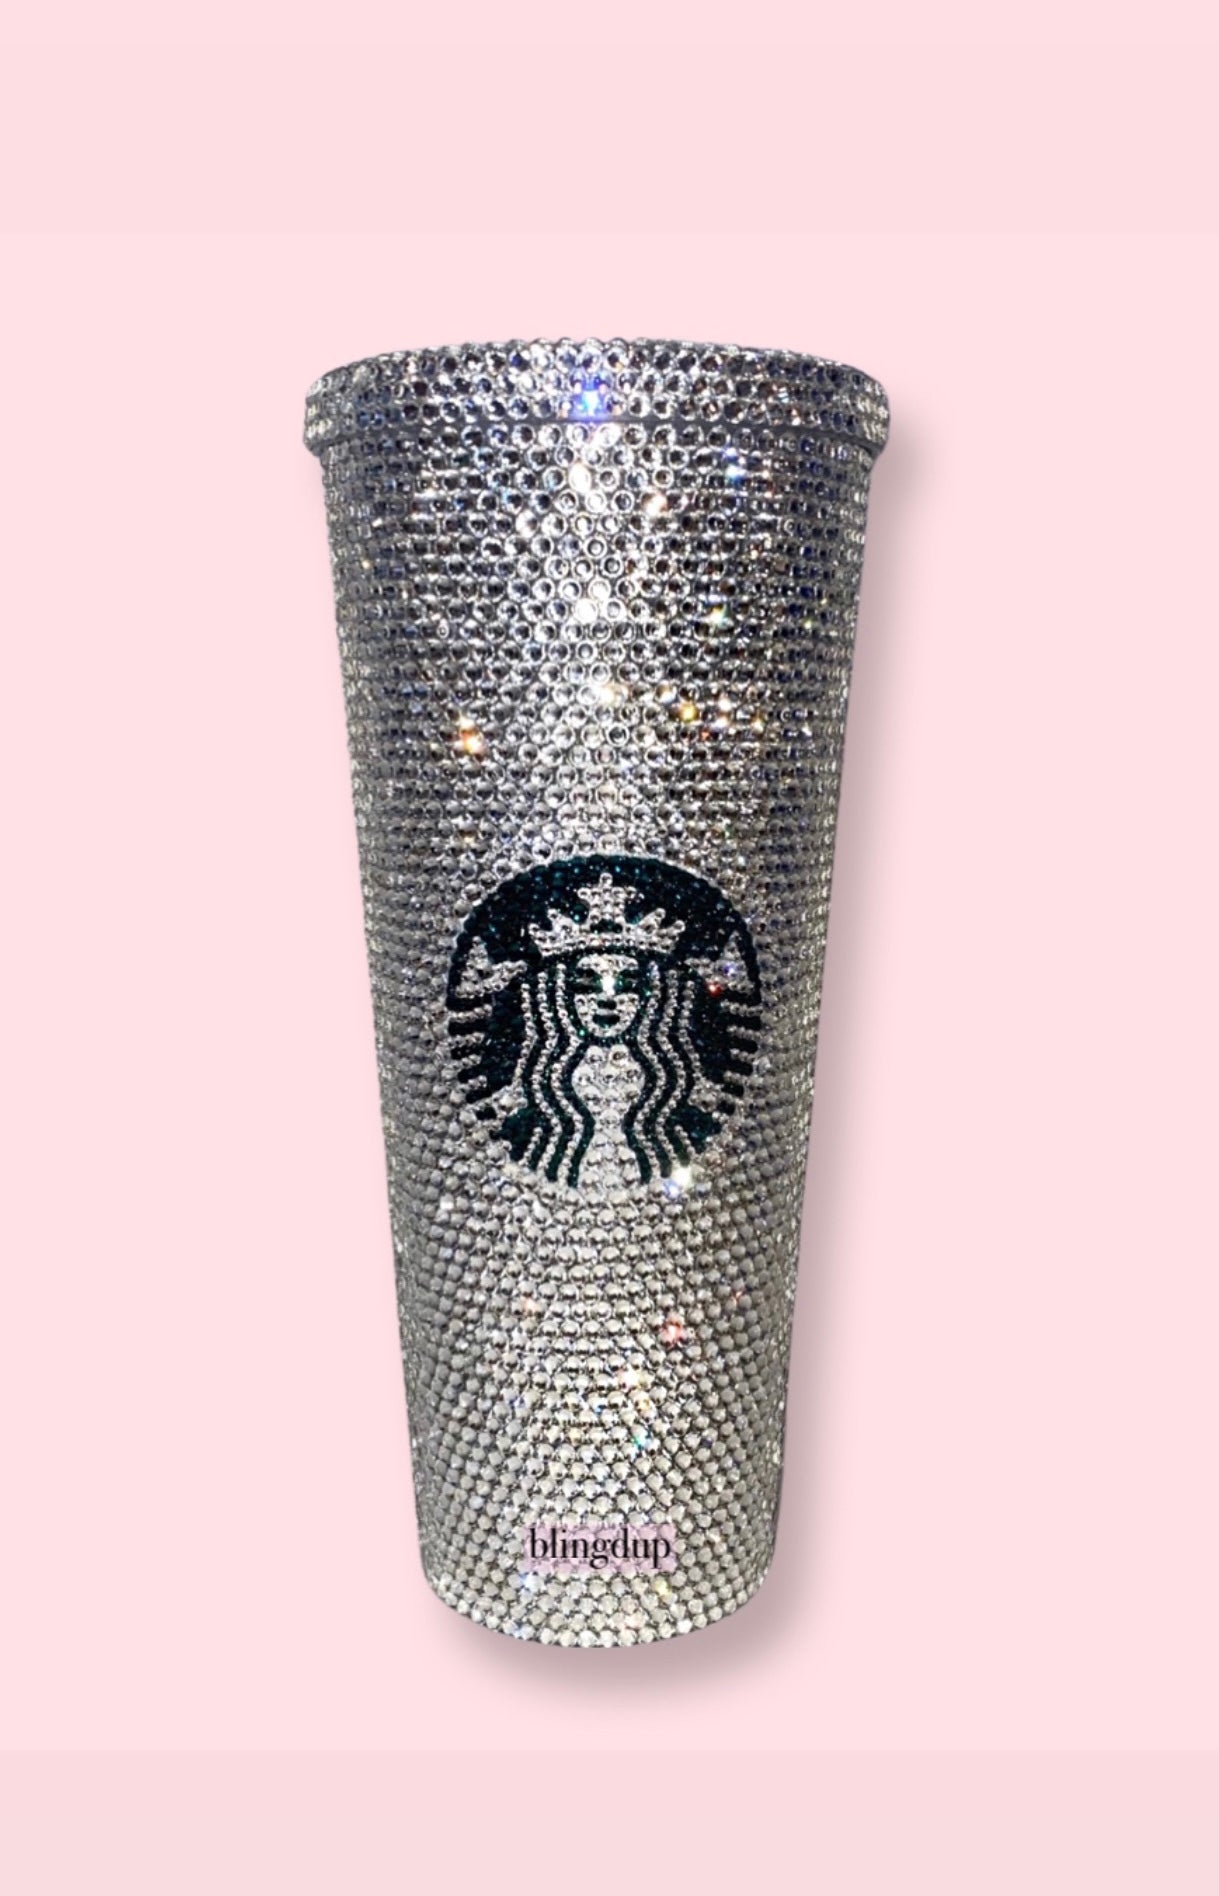 Glass/Swarovski Starbucks Hot Drink Cup Tumbler · AiCandyBling · Online  Store Powered by Storenvy